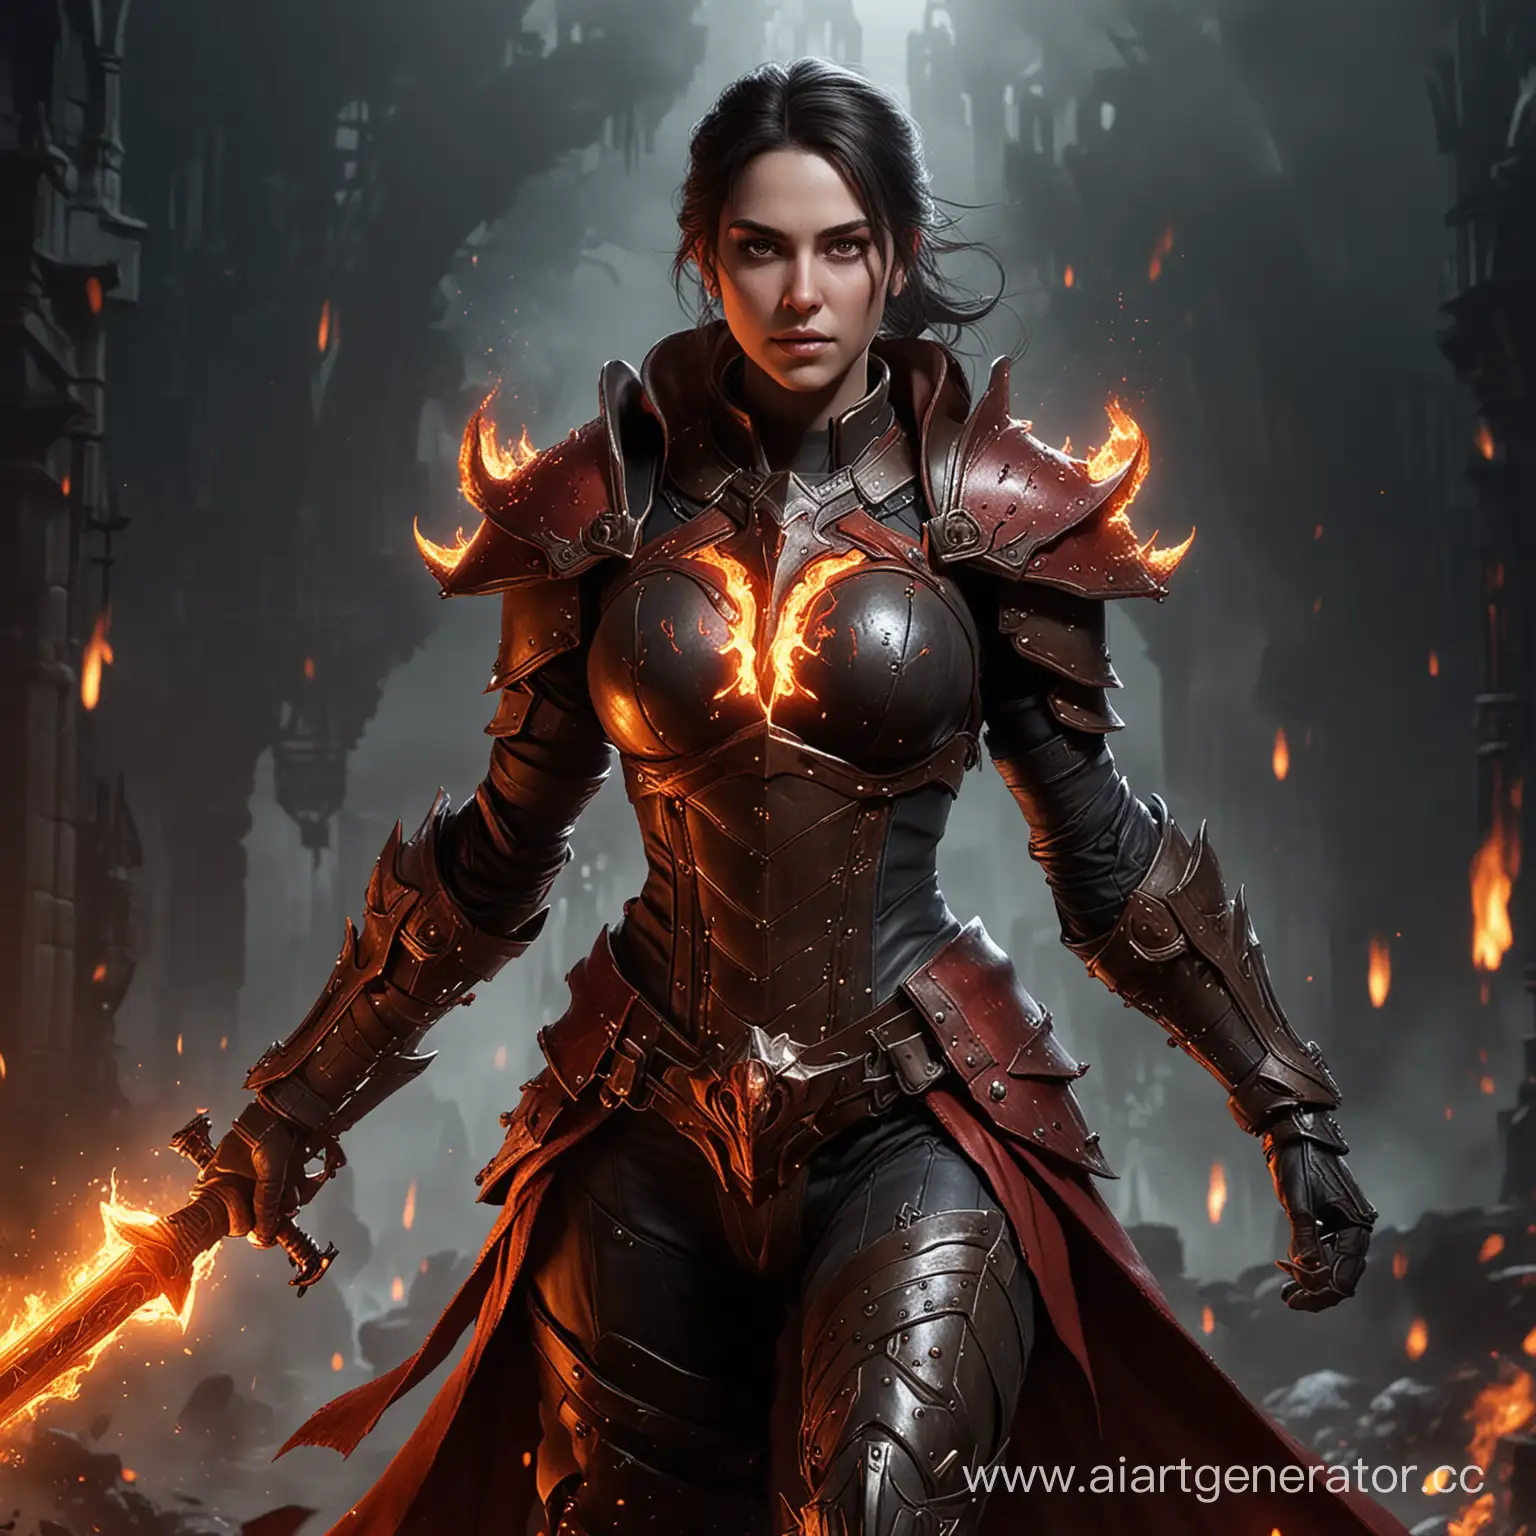 Inferno Inquisitor:She is Hellish hero, wearing armor that burns with the flames of the underworld, capable of wielding infernal powers. Make it cinematic 